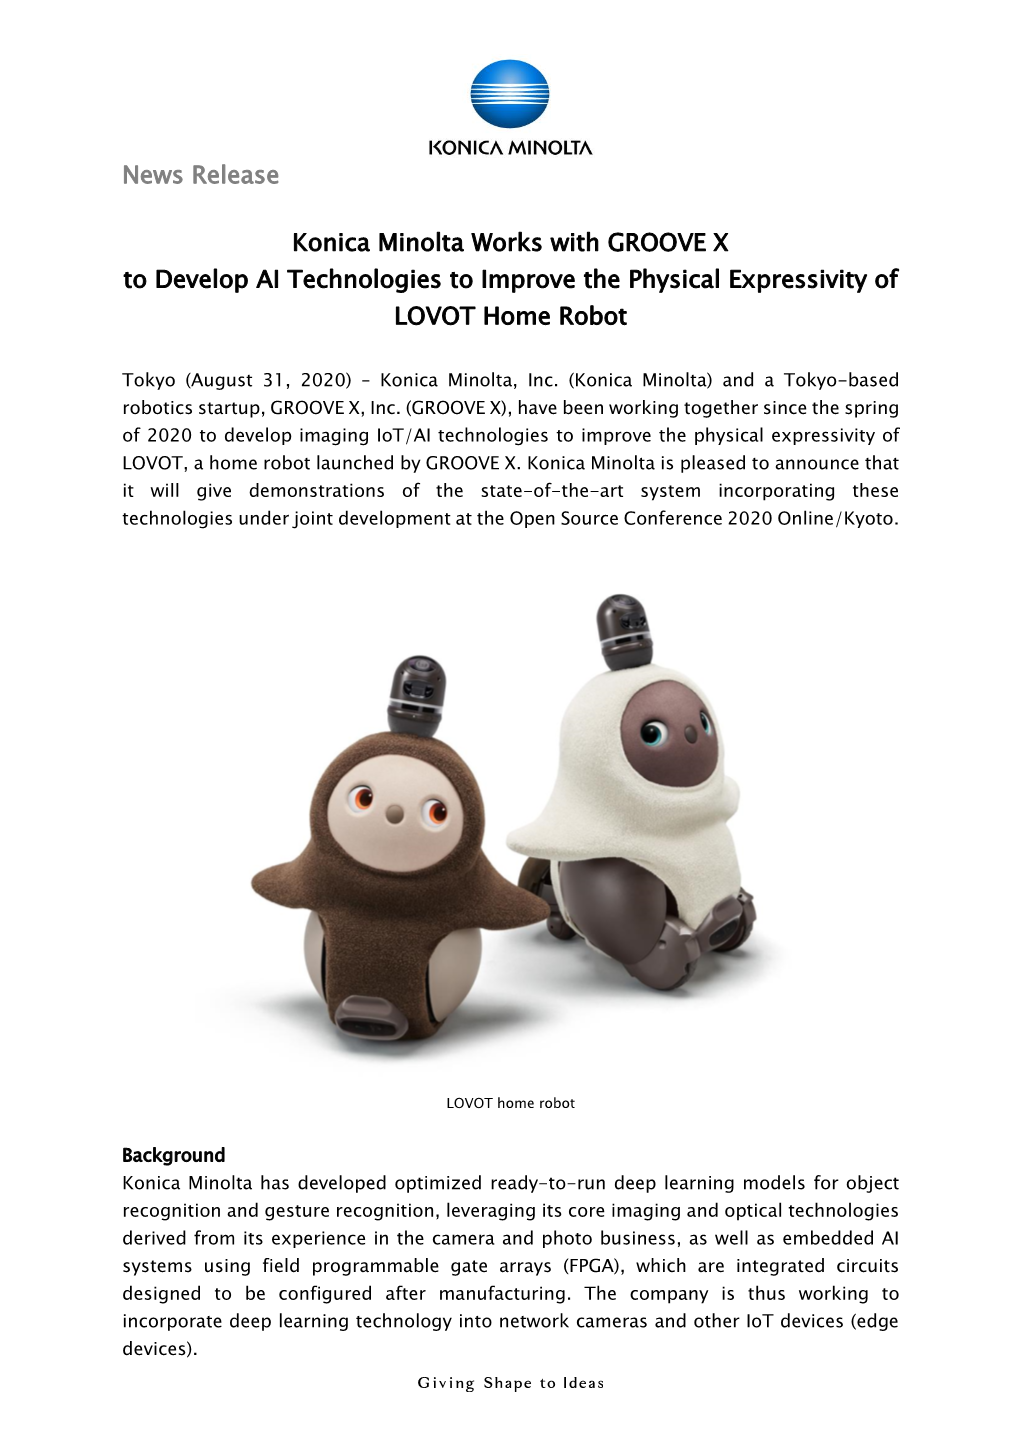 Konica Minolta Works with GROOVE X to Develop AI Technologies to Improve the Physical Expressivity of LOVOT Home Robot